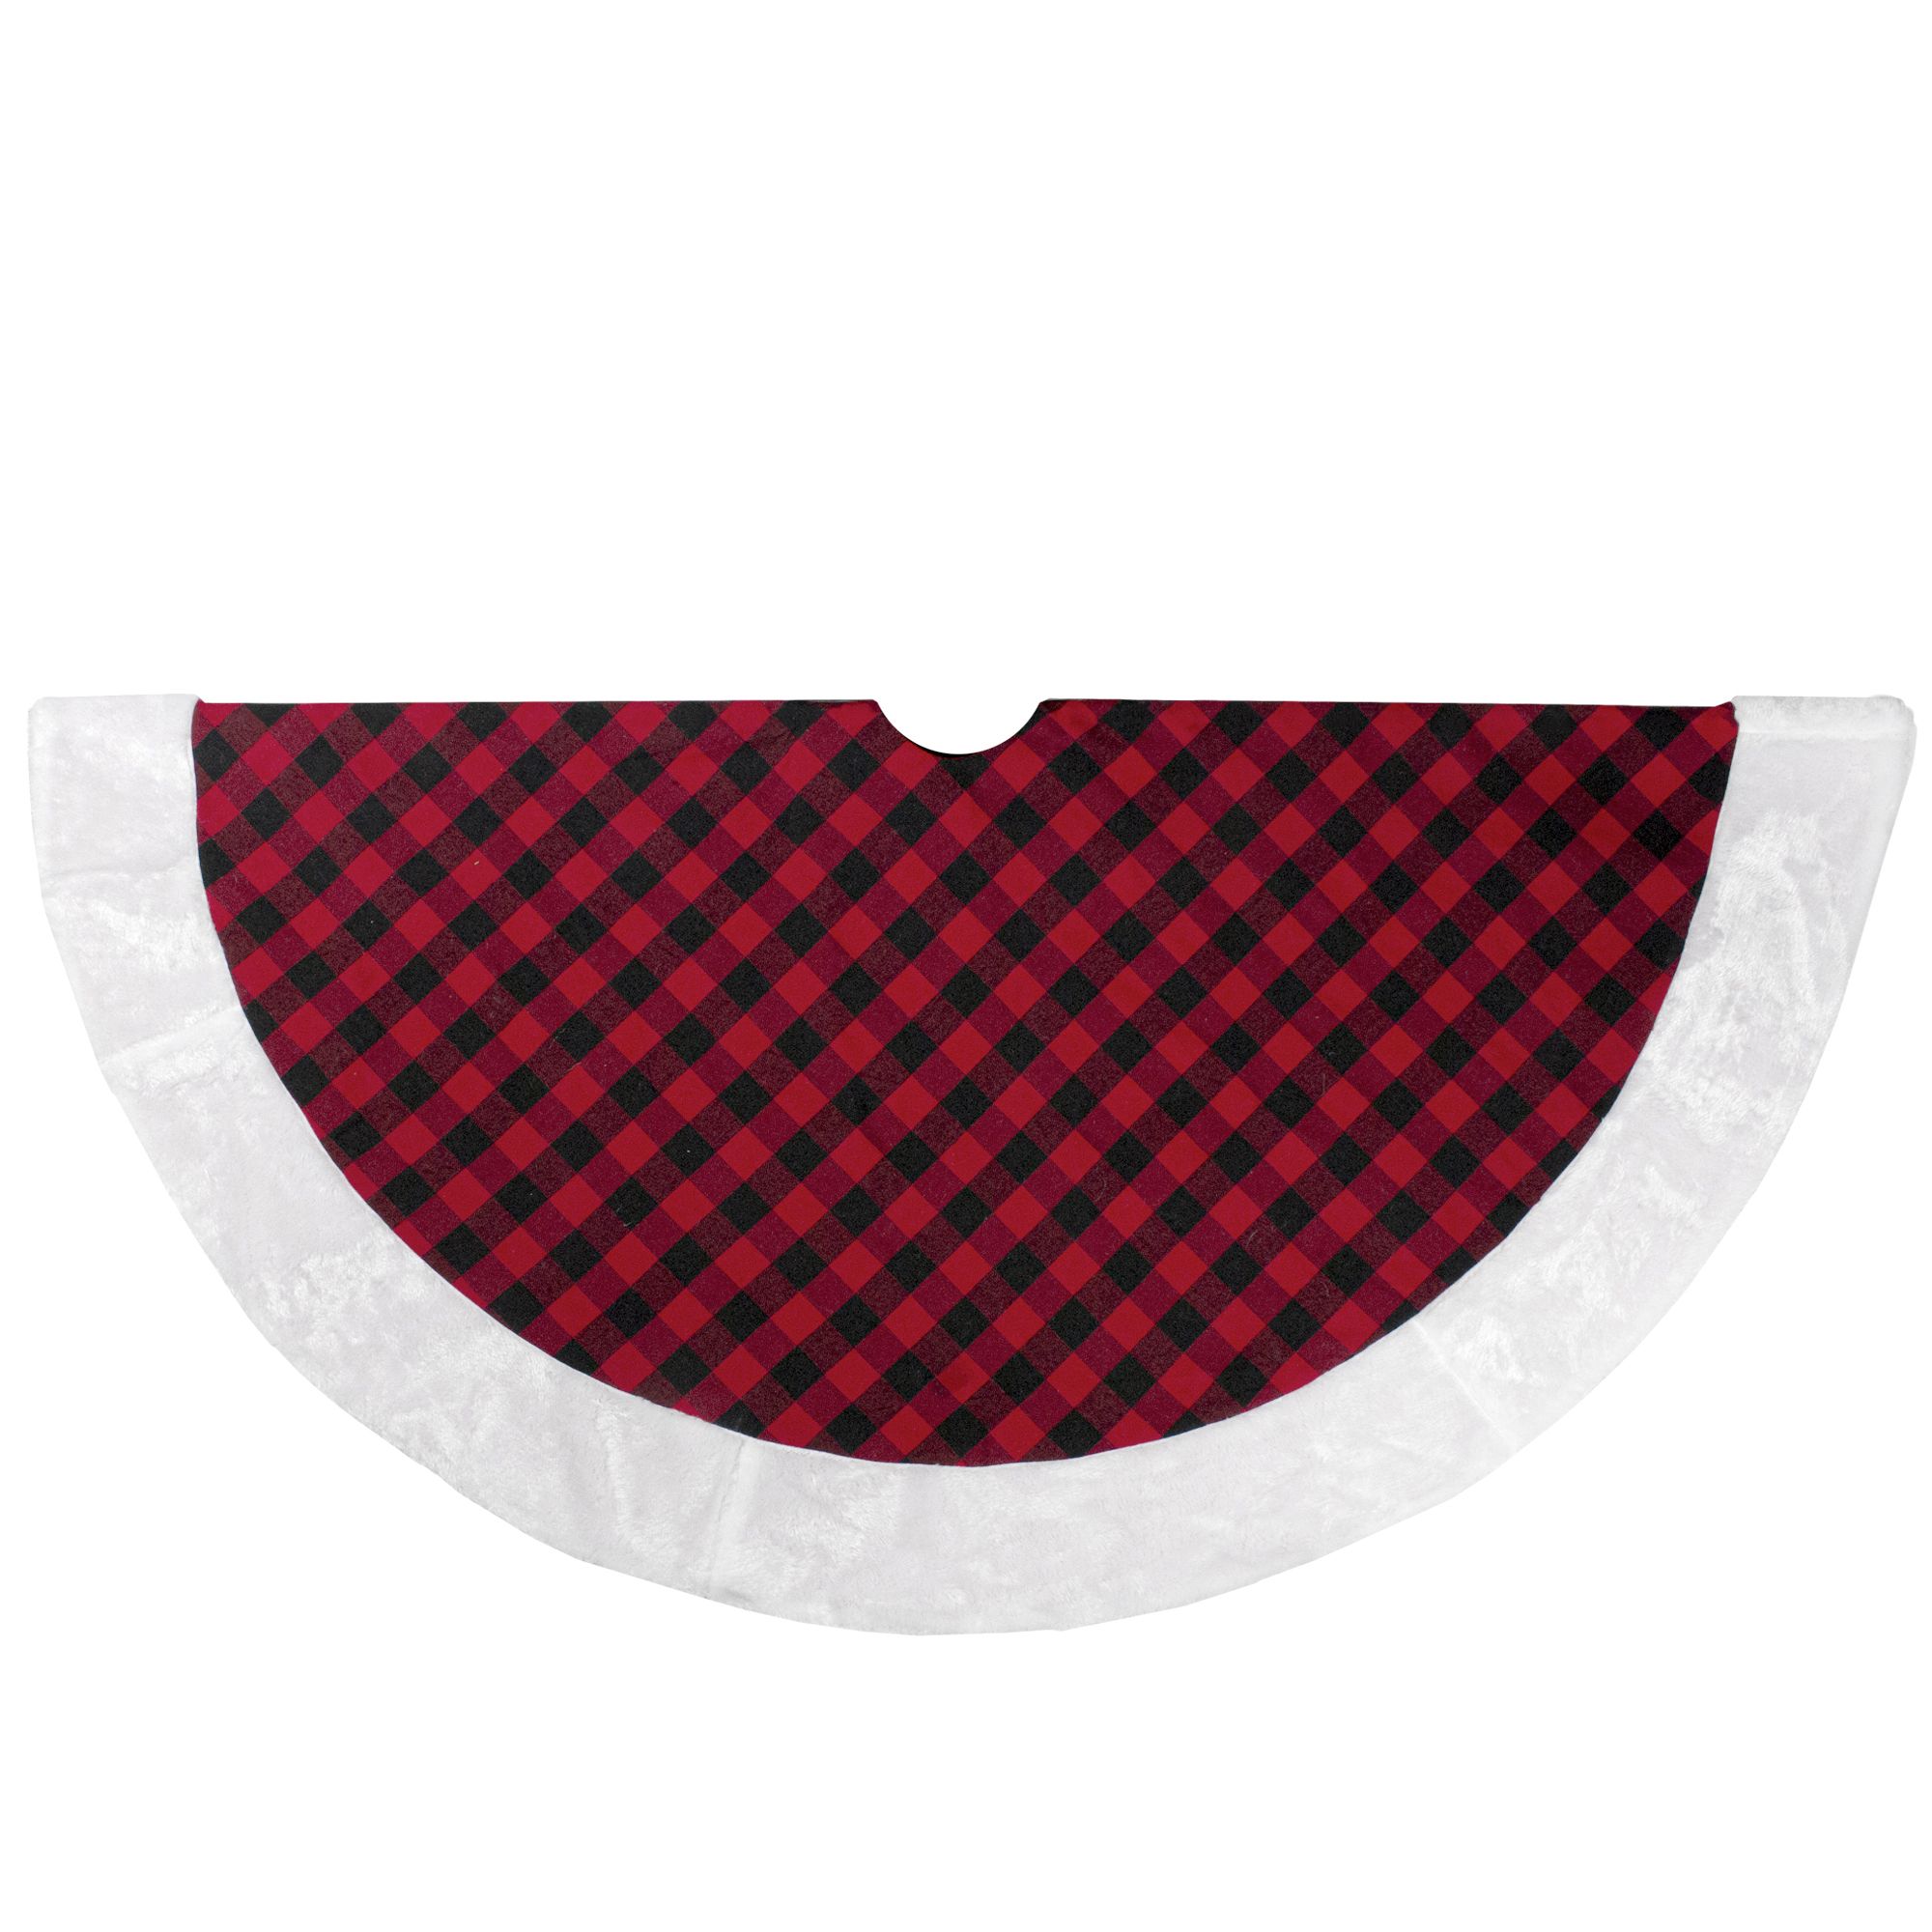 Northlight 48&quot; Buffalo Plaid Christmas Tree Skirt with Faux Fur Trim - Red and Black